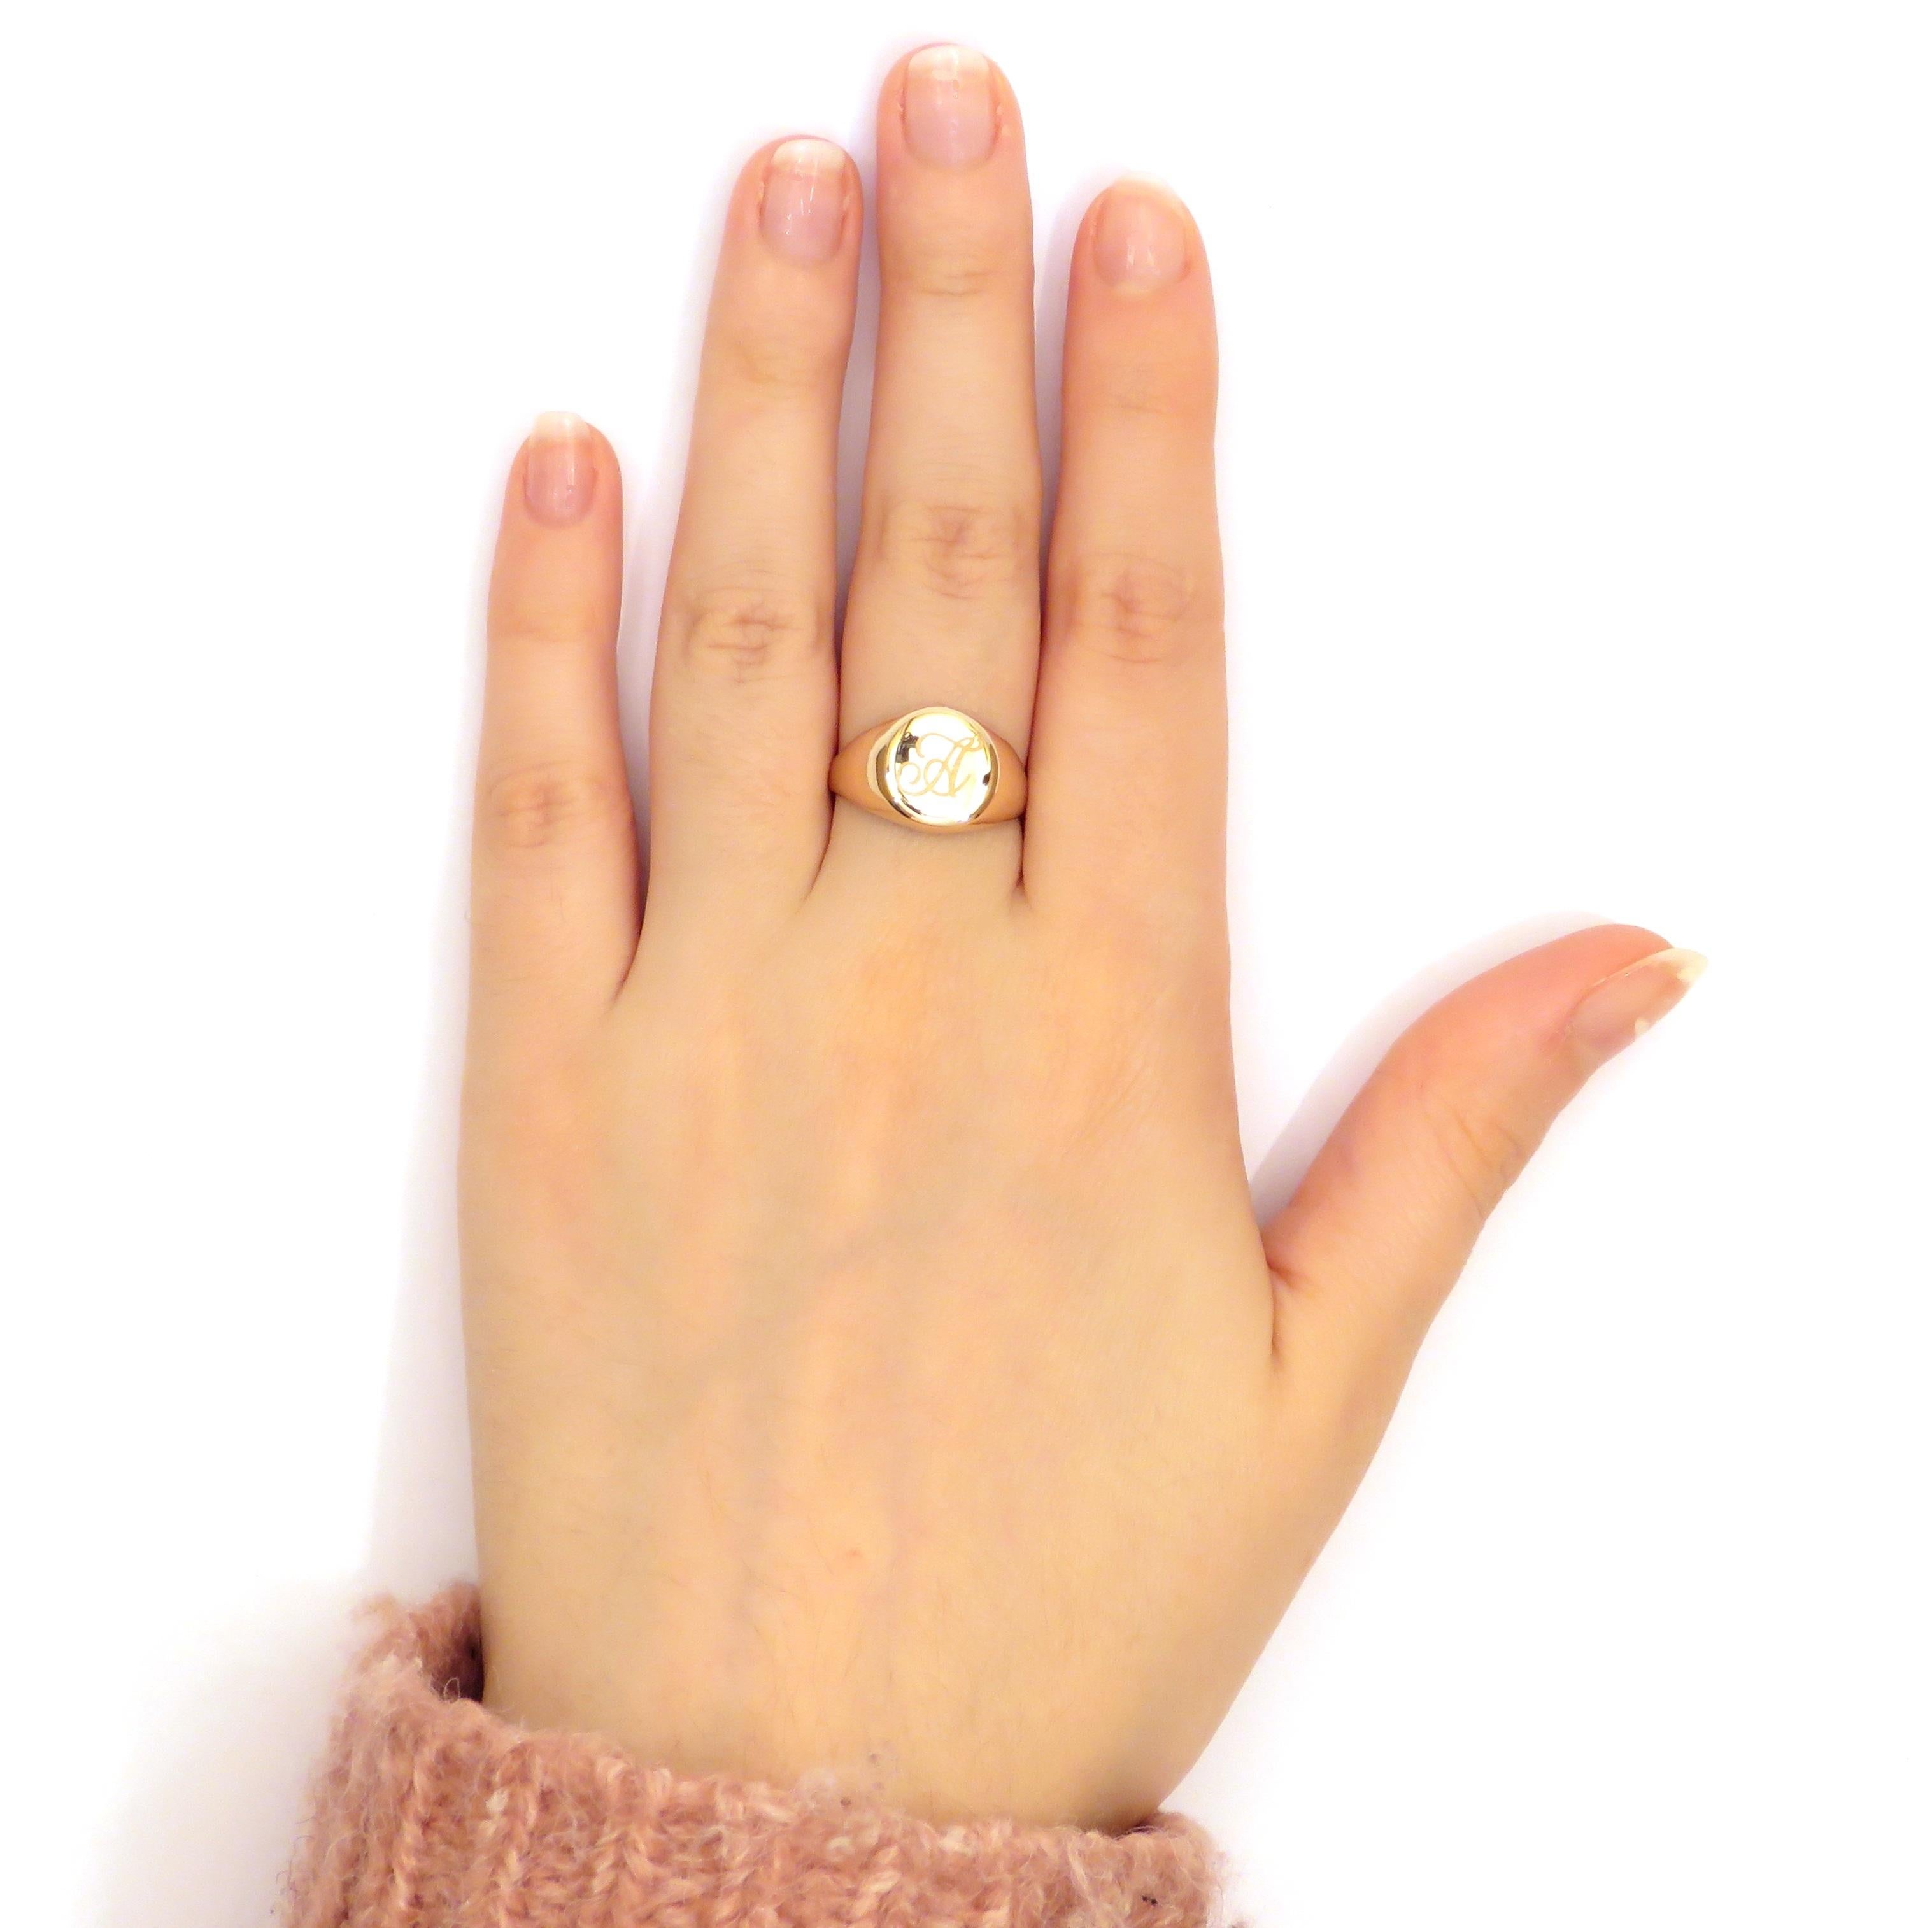 Modern Signet Rose Gold Custom Ring Handcrafted in Italy by Botta Gioielli